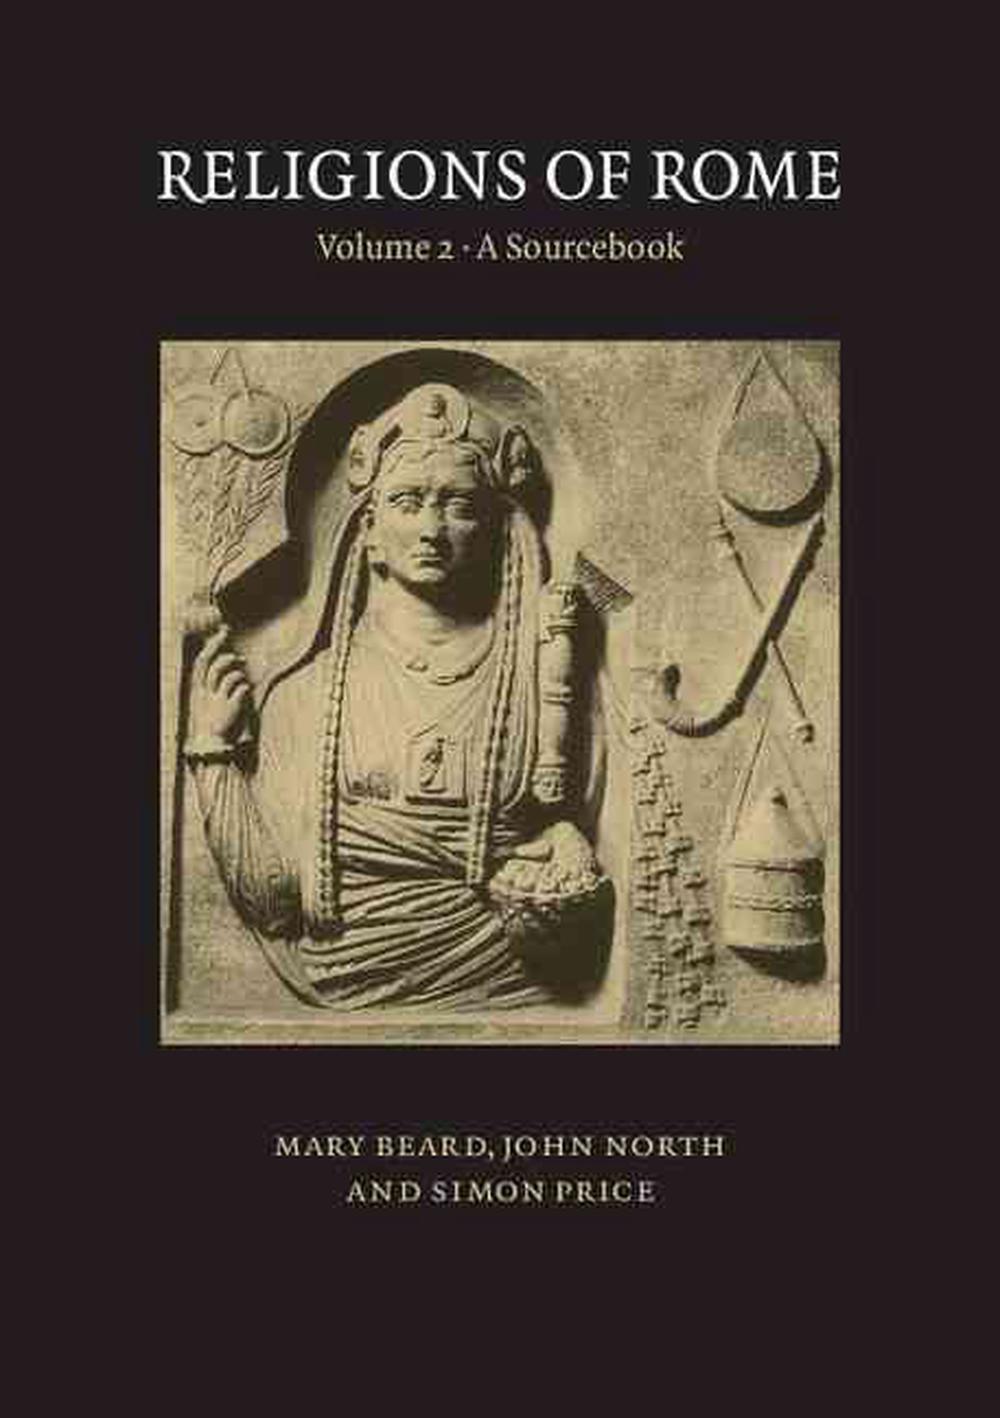 Religions of Rome Volume 2, a Sourcebook by Mary Beard (English) Paperback Book 9780521456463